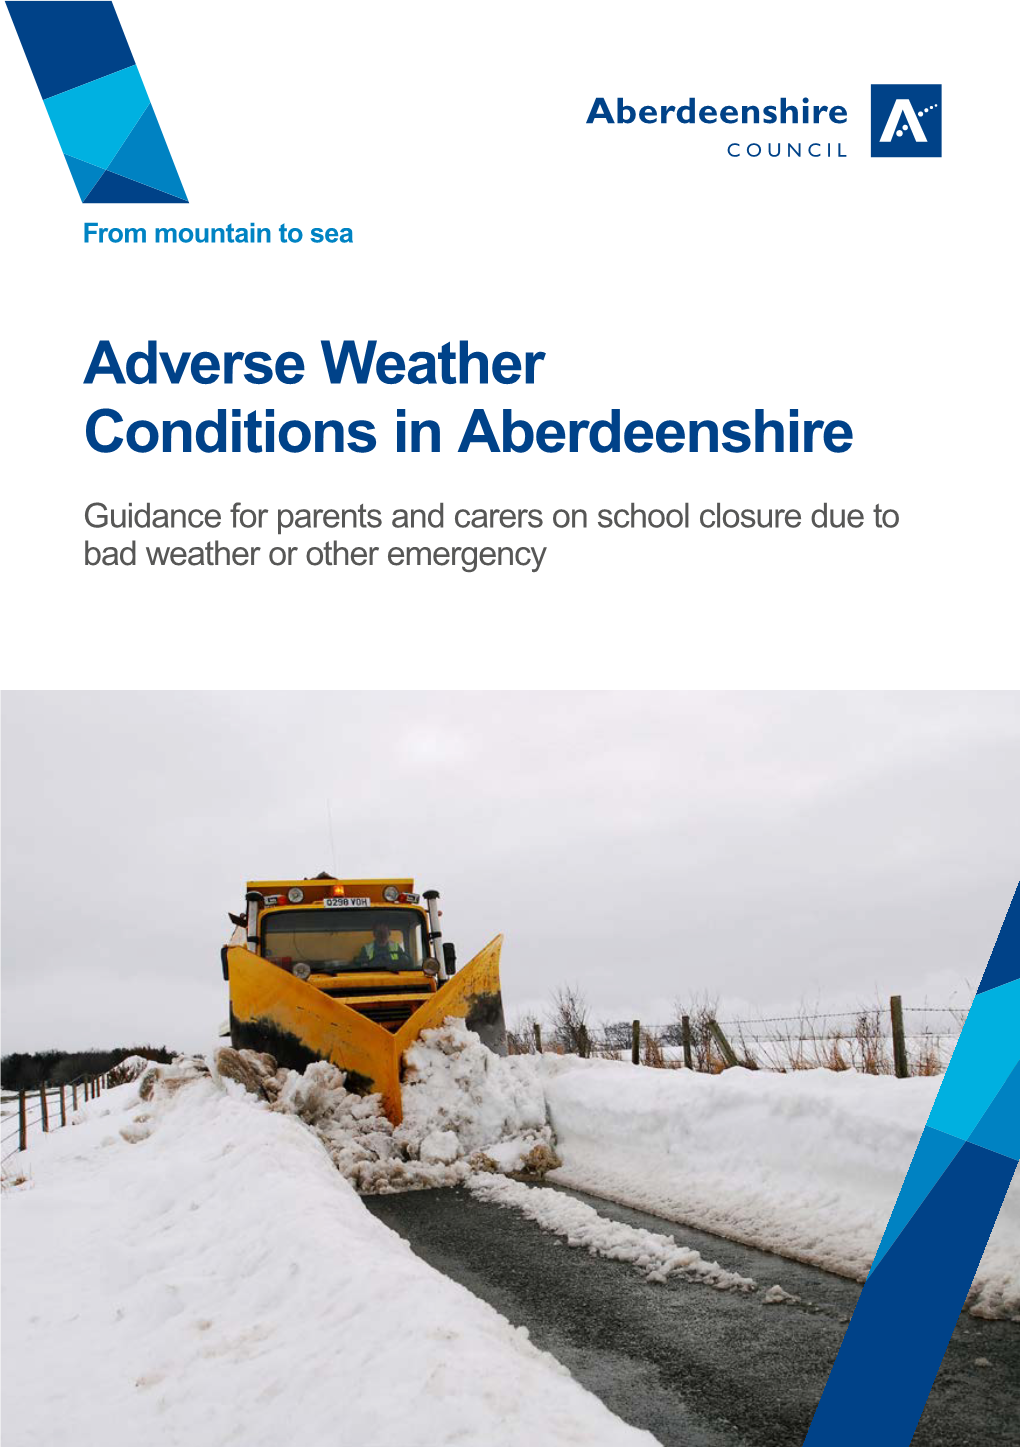 Adverse Weather Conditions in Aberdeenshire